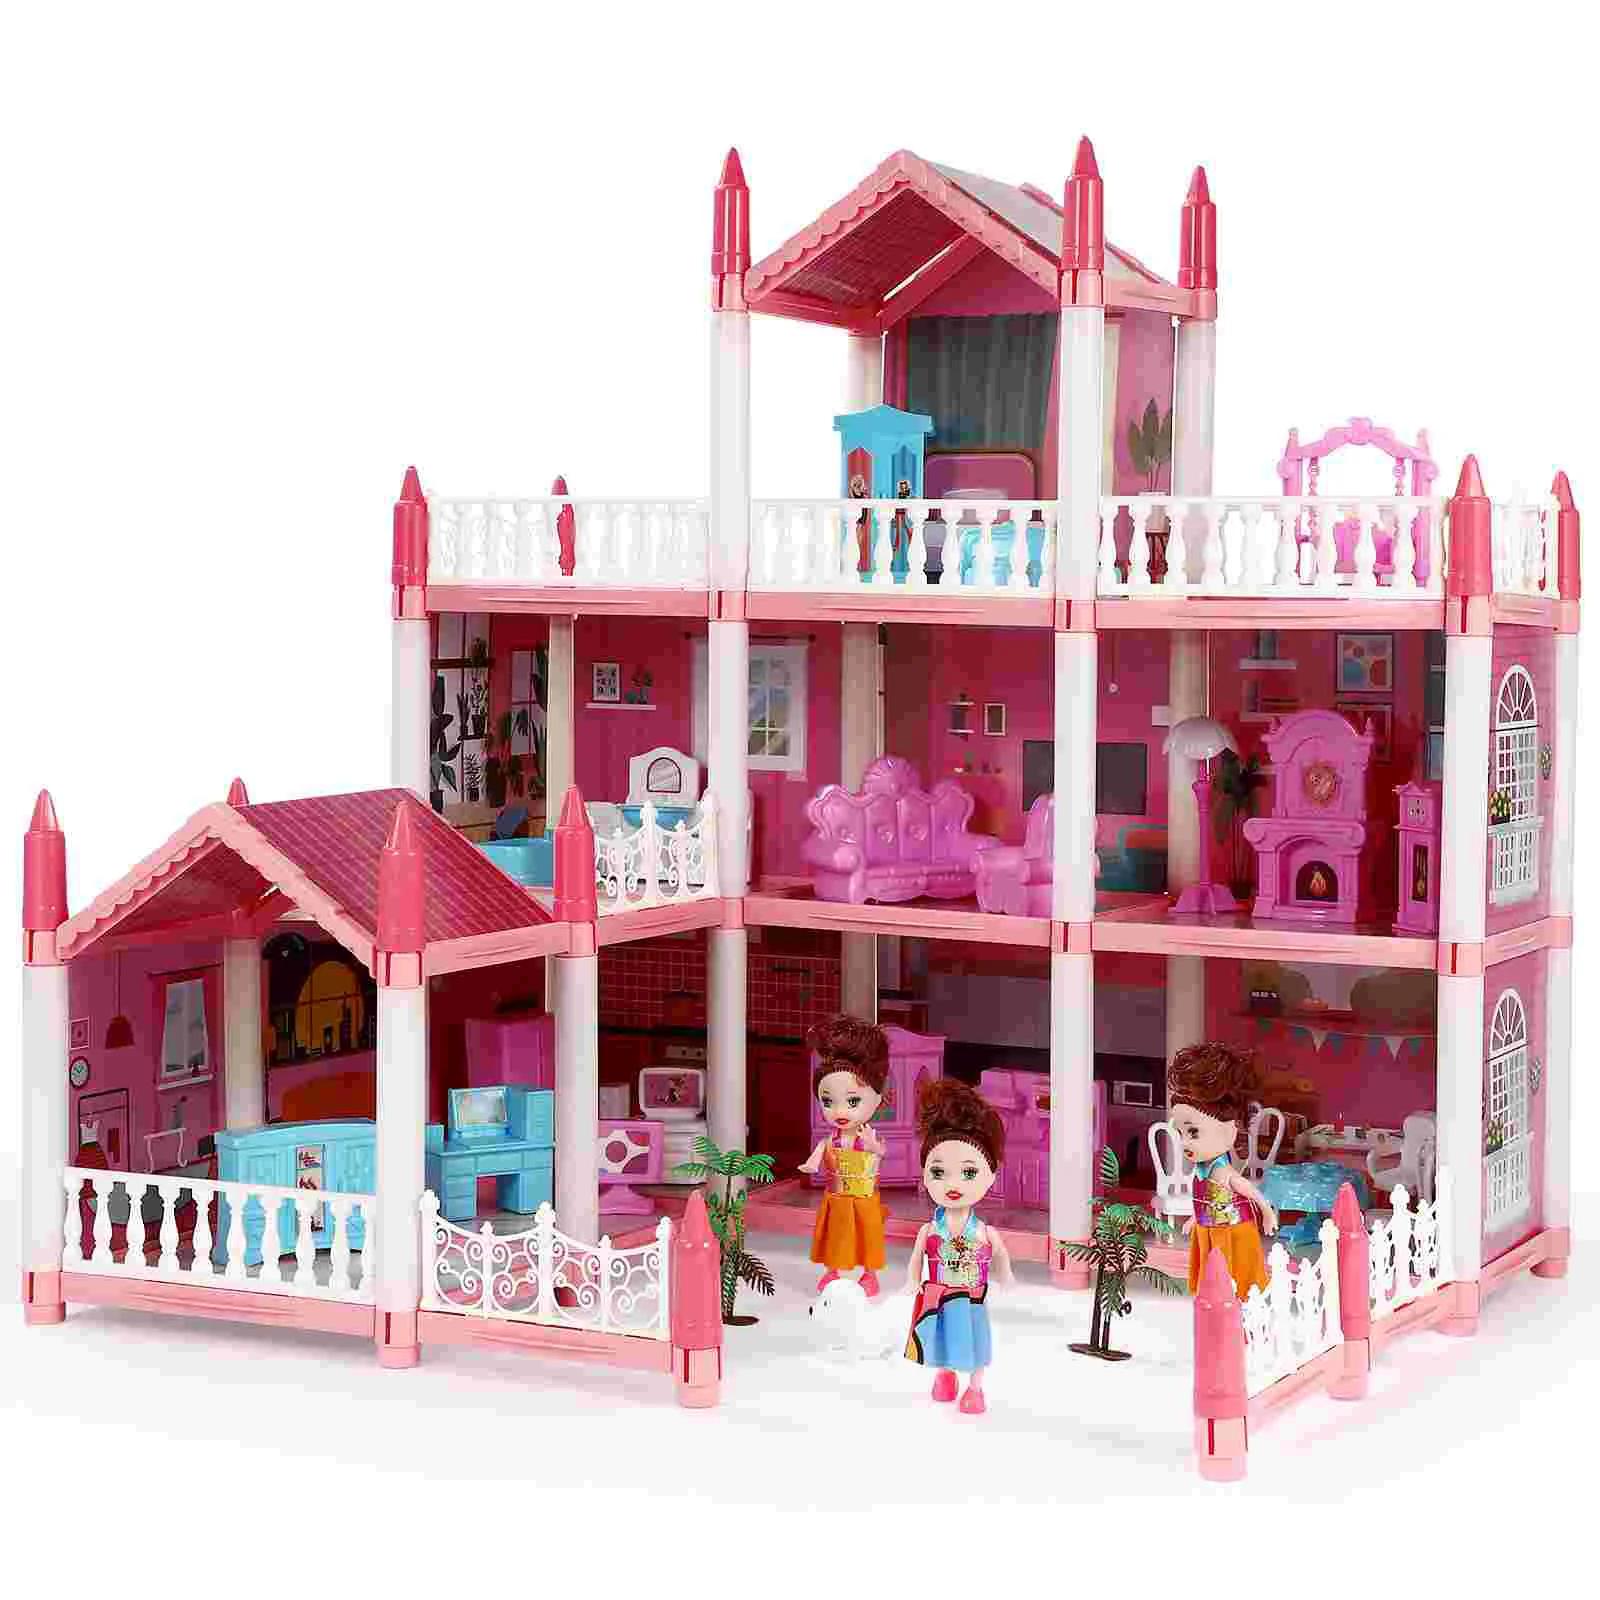 Girl Children's Play House Toy Girl's Imitation 9 Rooms Pink Princess Toys Pp With 3 Stories the collected stories of mansfield